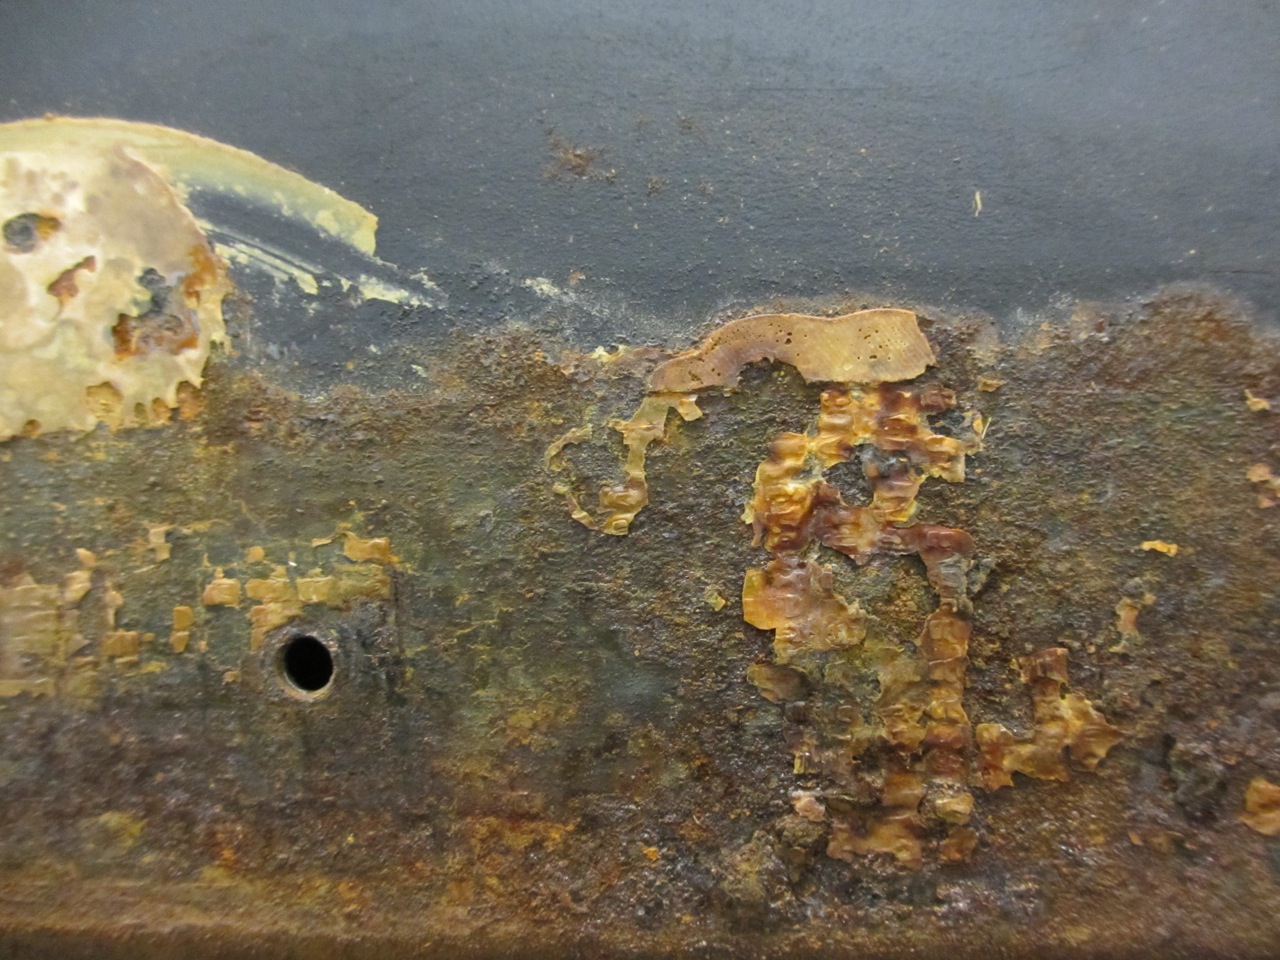  The chassis has a lot of rusted spots that we need to remove before putting the new underbelly sheet on. This picture shows the mix of rust and old glue that was used to put on the original underbelly wrap. 